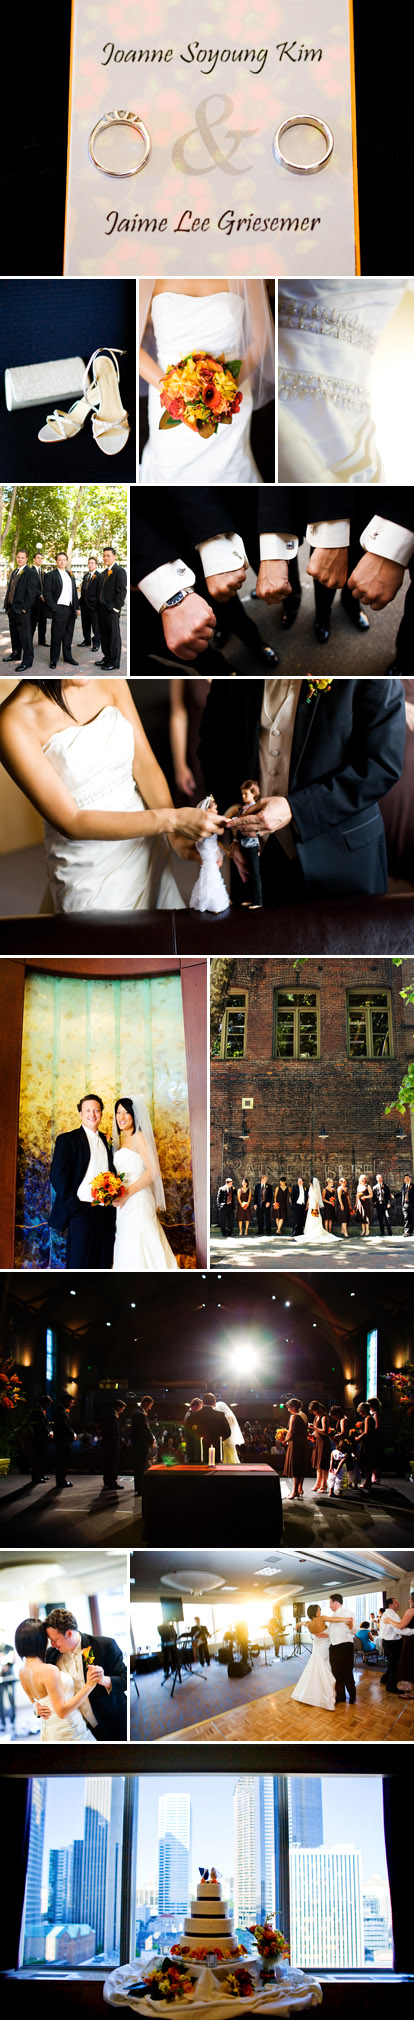 Modern, urban wedding, Downtown Seattle, Images by GH Kim Photography